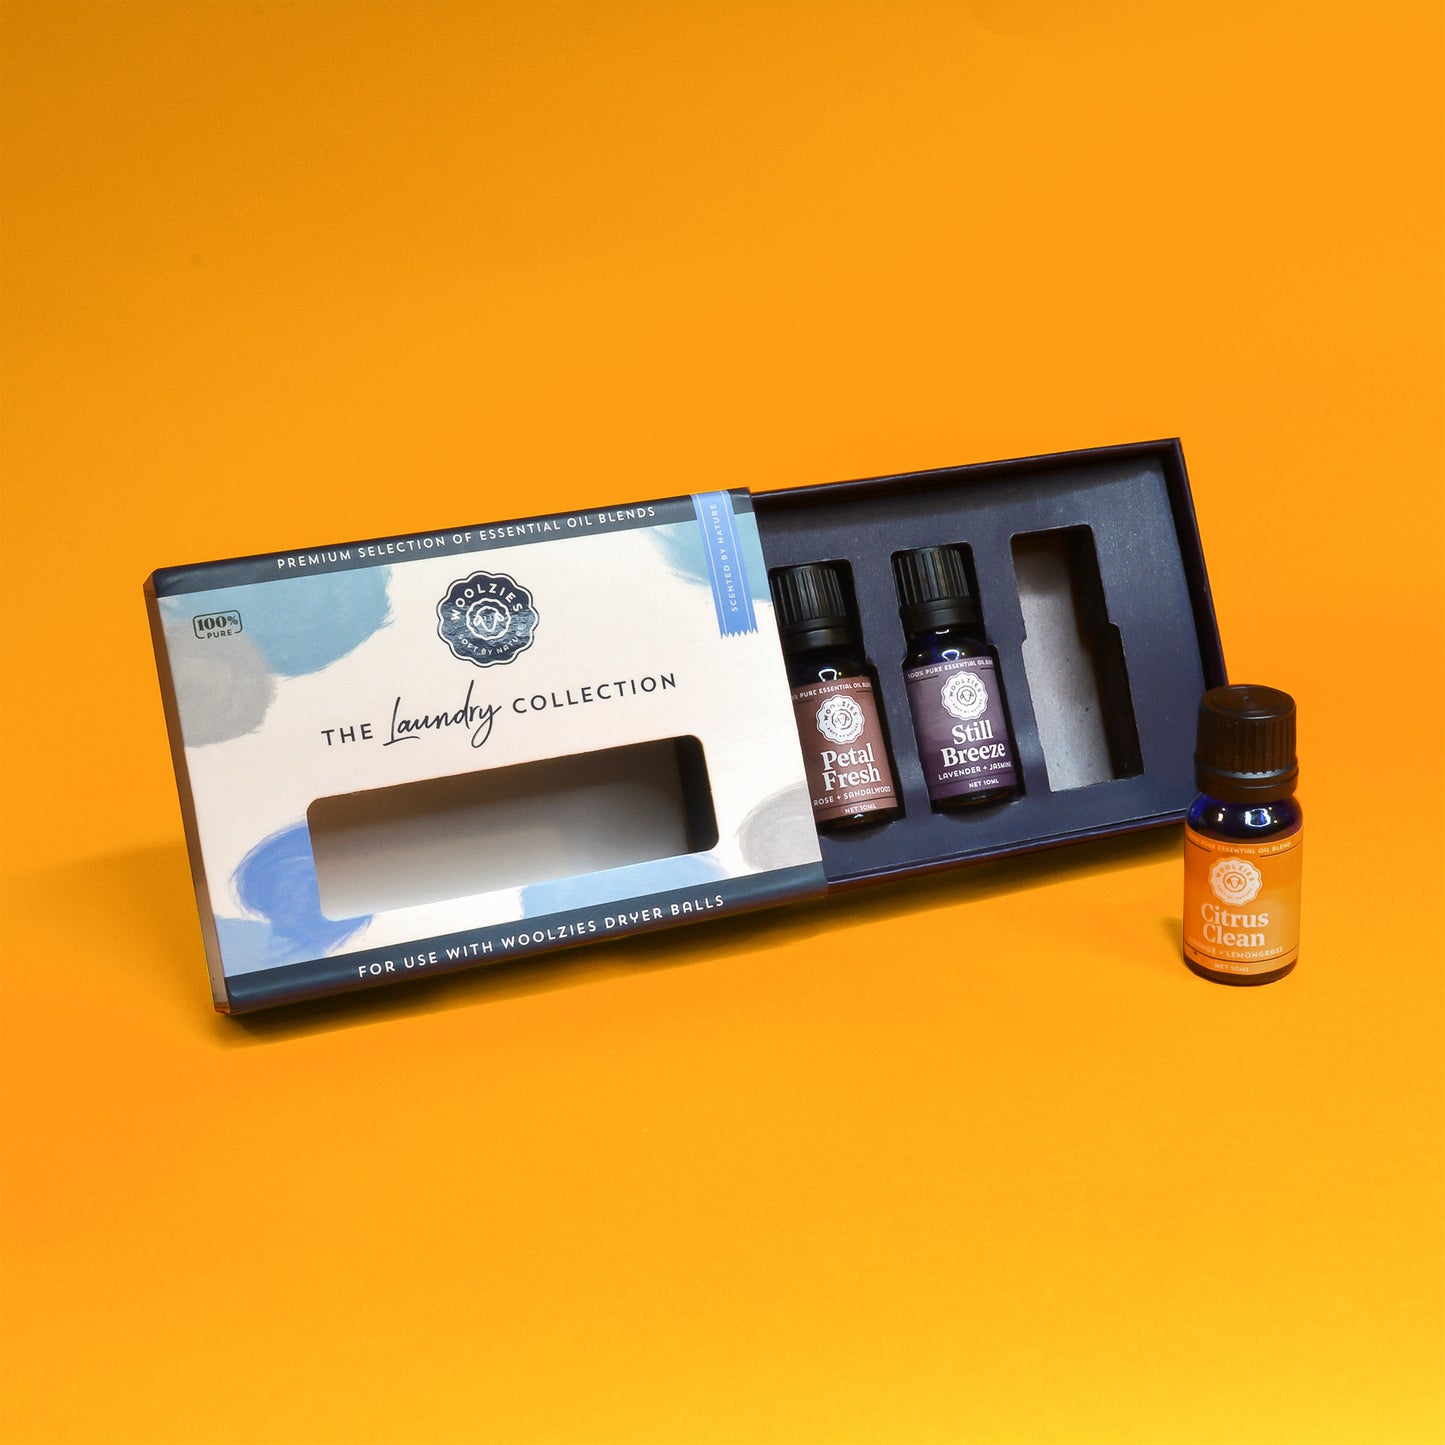 An open box showing a set of three vials of essential oils for laundry by Woolzies